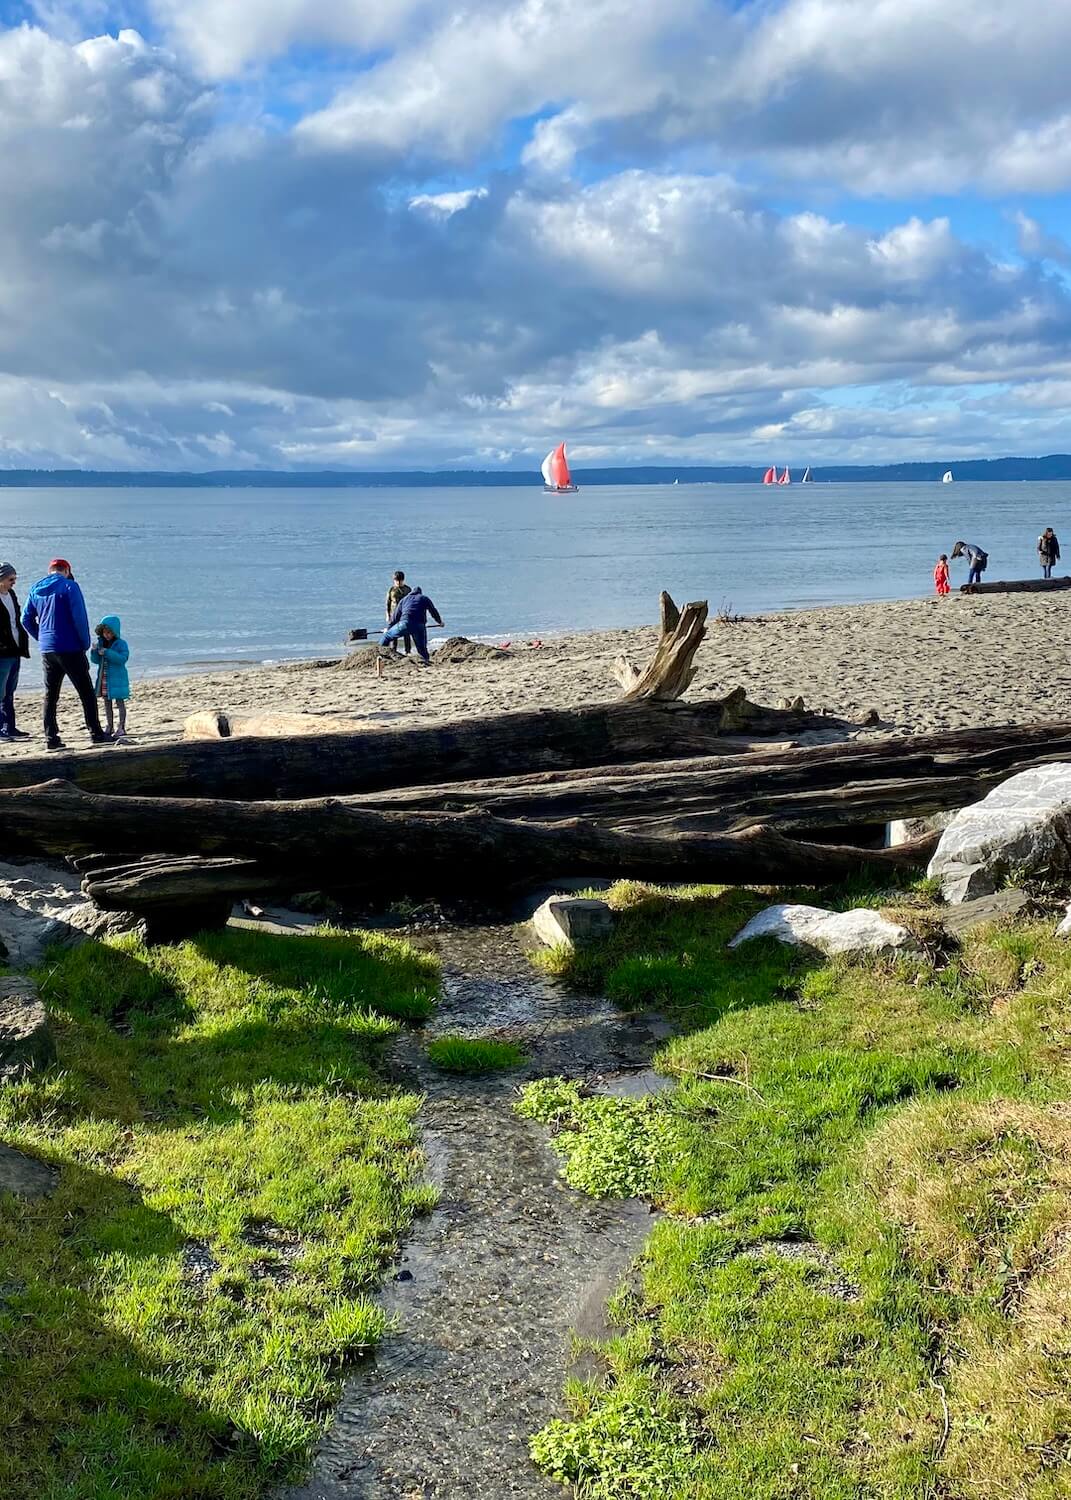 The beautiful coastline of the Salish Sea as seen from Golden Gardens park in Seattle. There is a stream babbling through green grass and under drift logs and rocks out to a beach with a number of people digging and playing in the sand. There are sailboats in the sea under gray clouds.